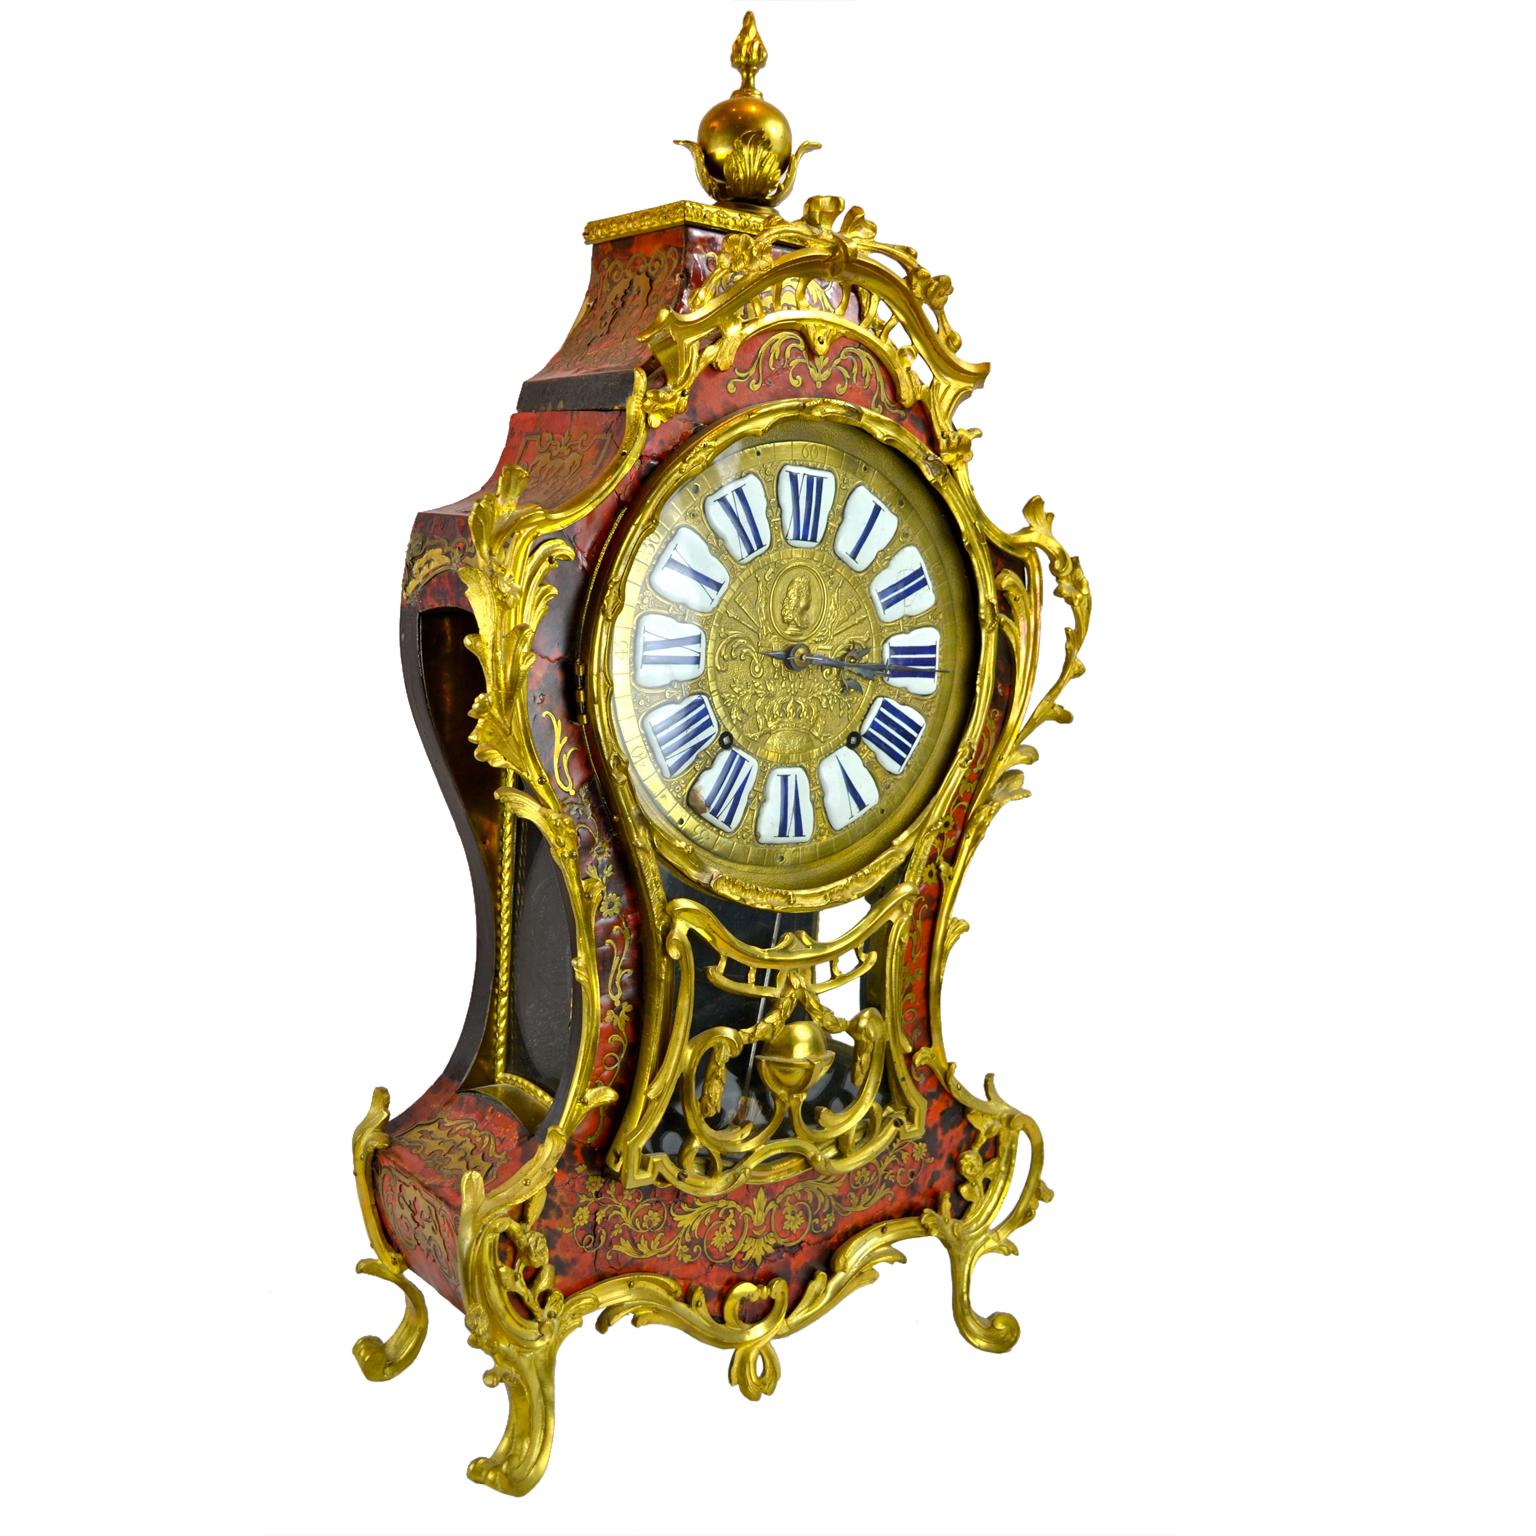 A Louis XV Boulle bracket clock the case inlaid with tortoiseshell on a brass ground, with Rococo scrollwork and gilded mounts. The clock has its original movement.